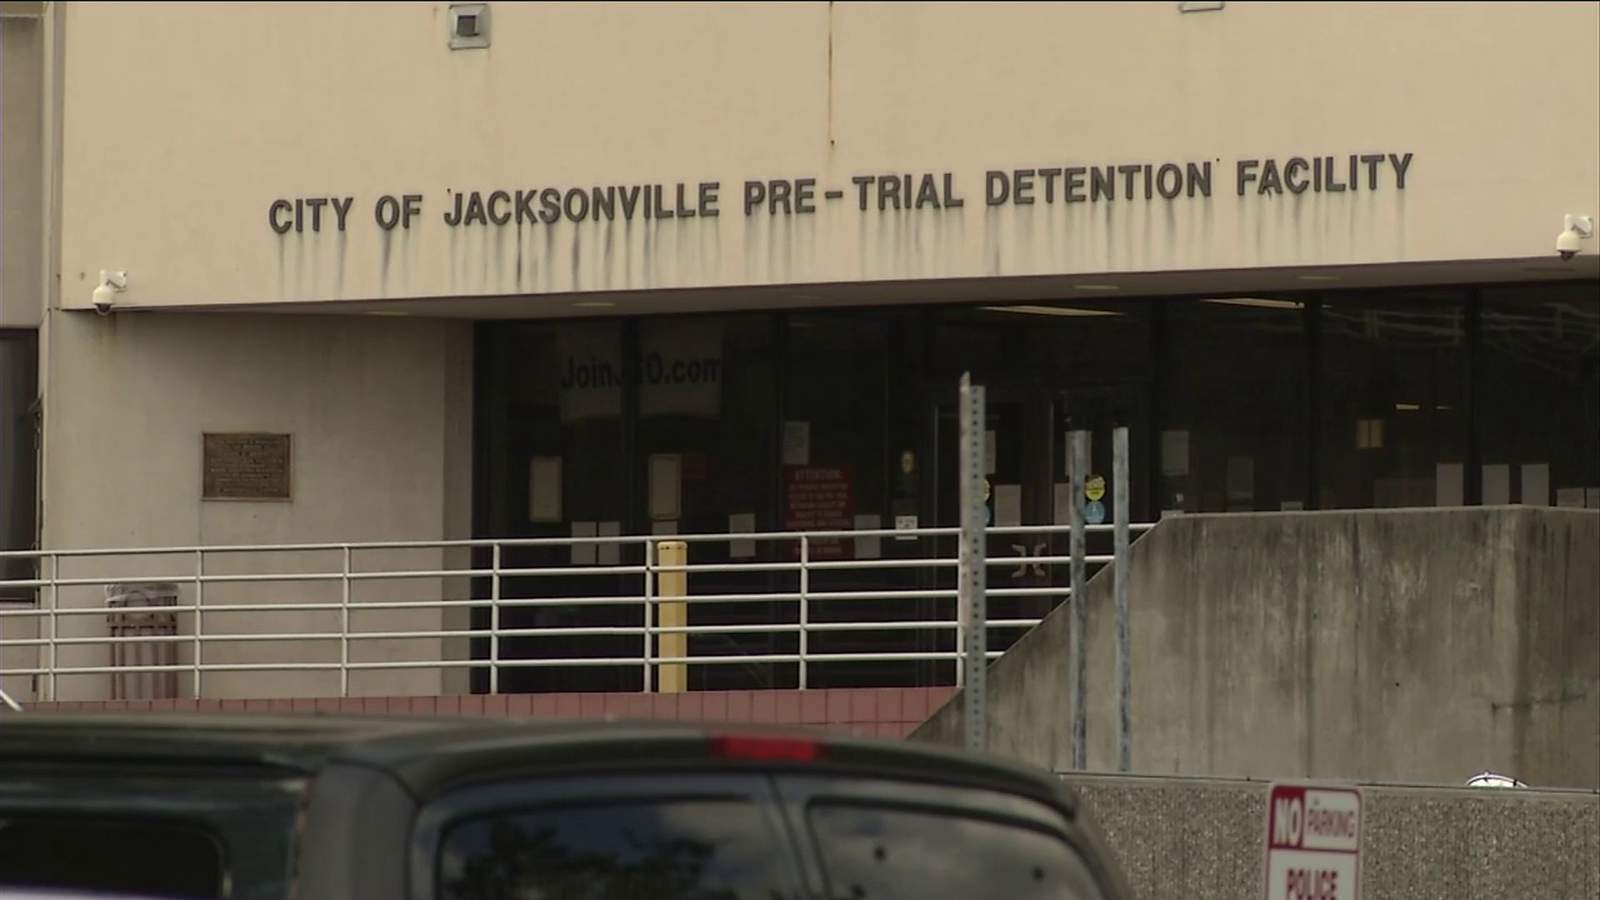 20 inmates at Duval County jail test positive for COVID19